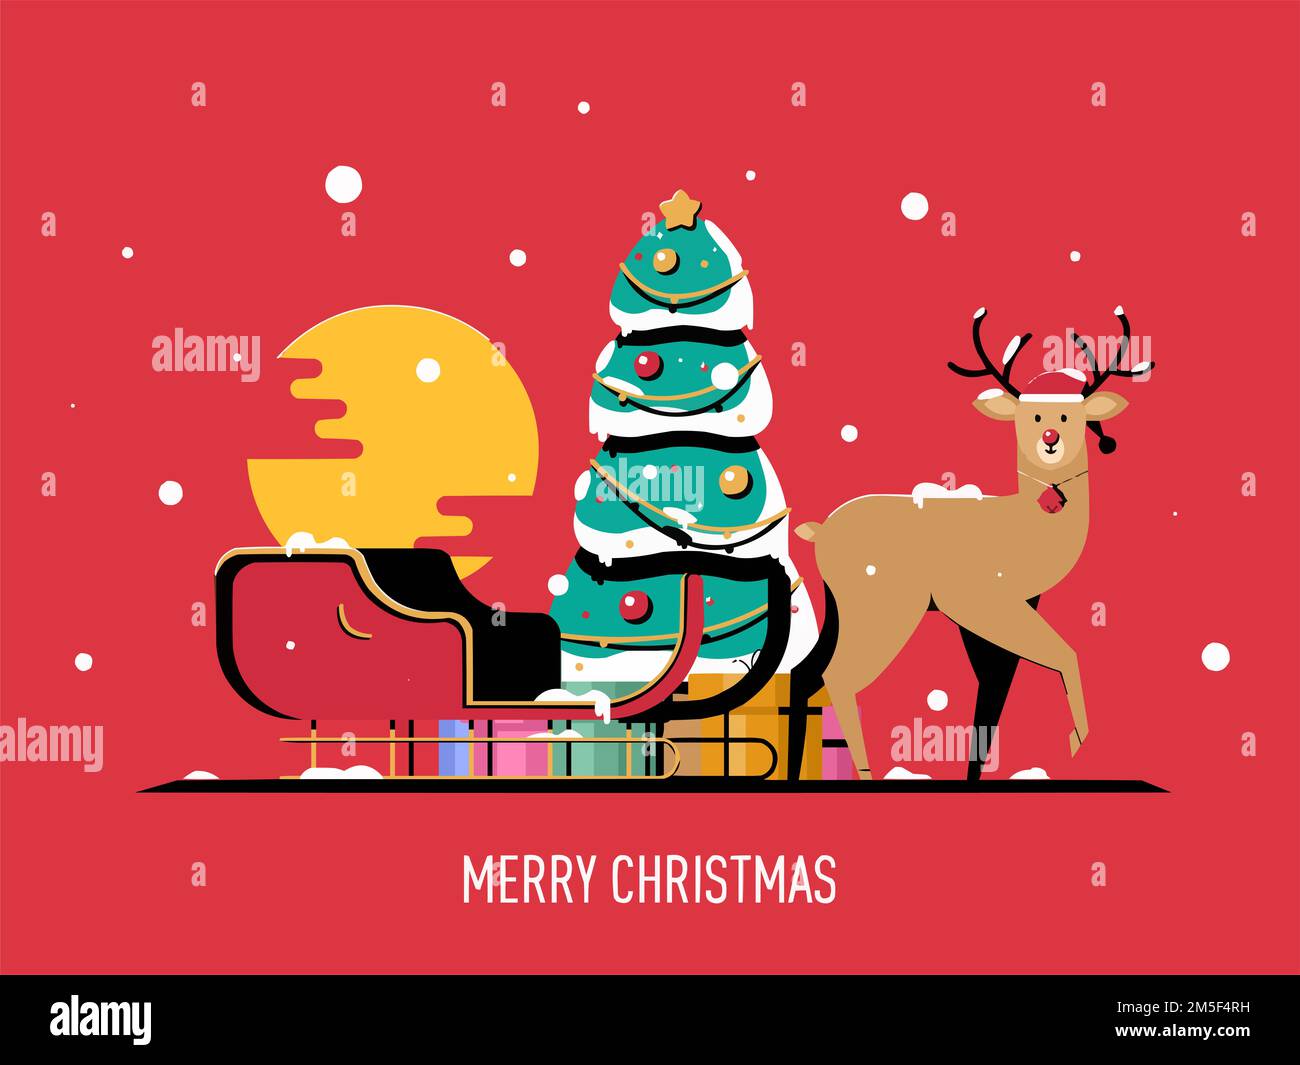 Merry Christmas and Happy New Year Christmas Celebration Postcard Website illustration Stock Photo